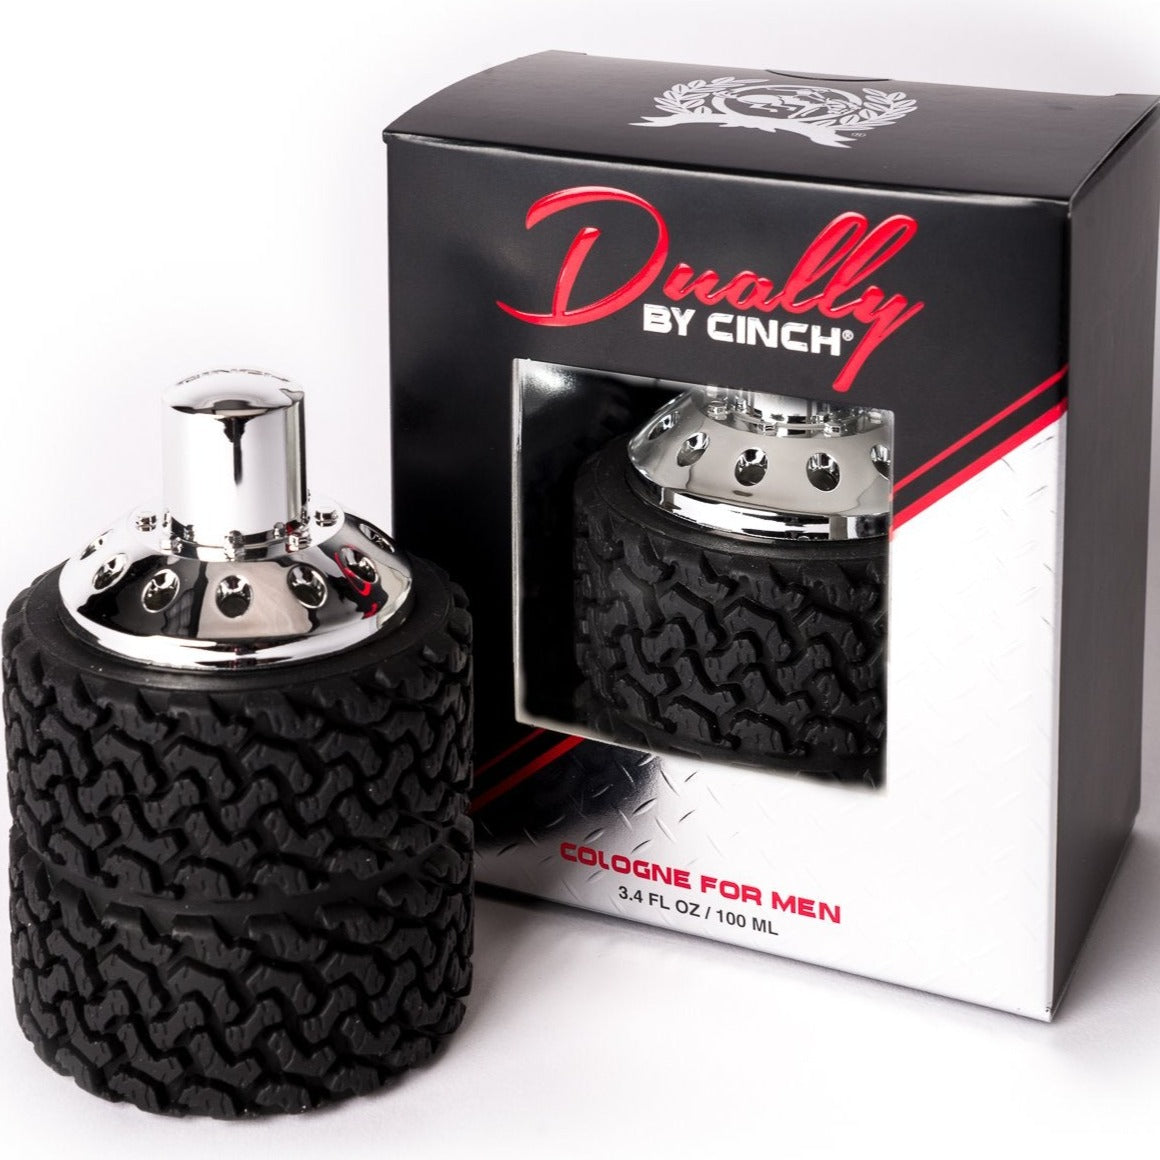 Dually by Cinch Cologne for Men